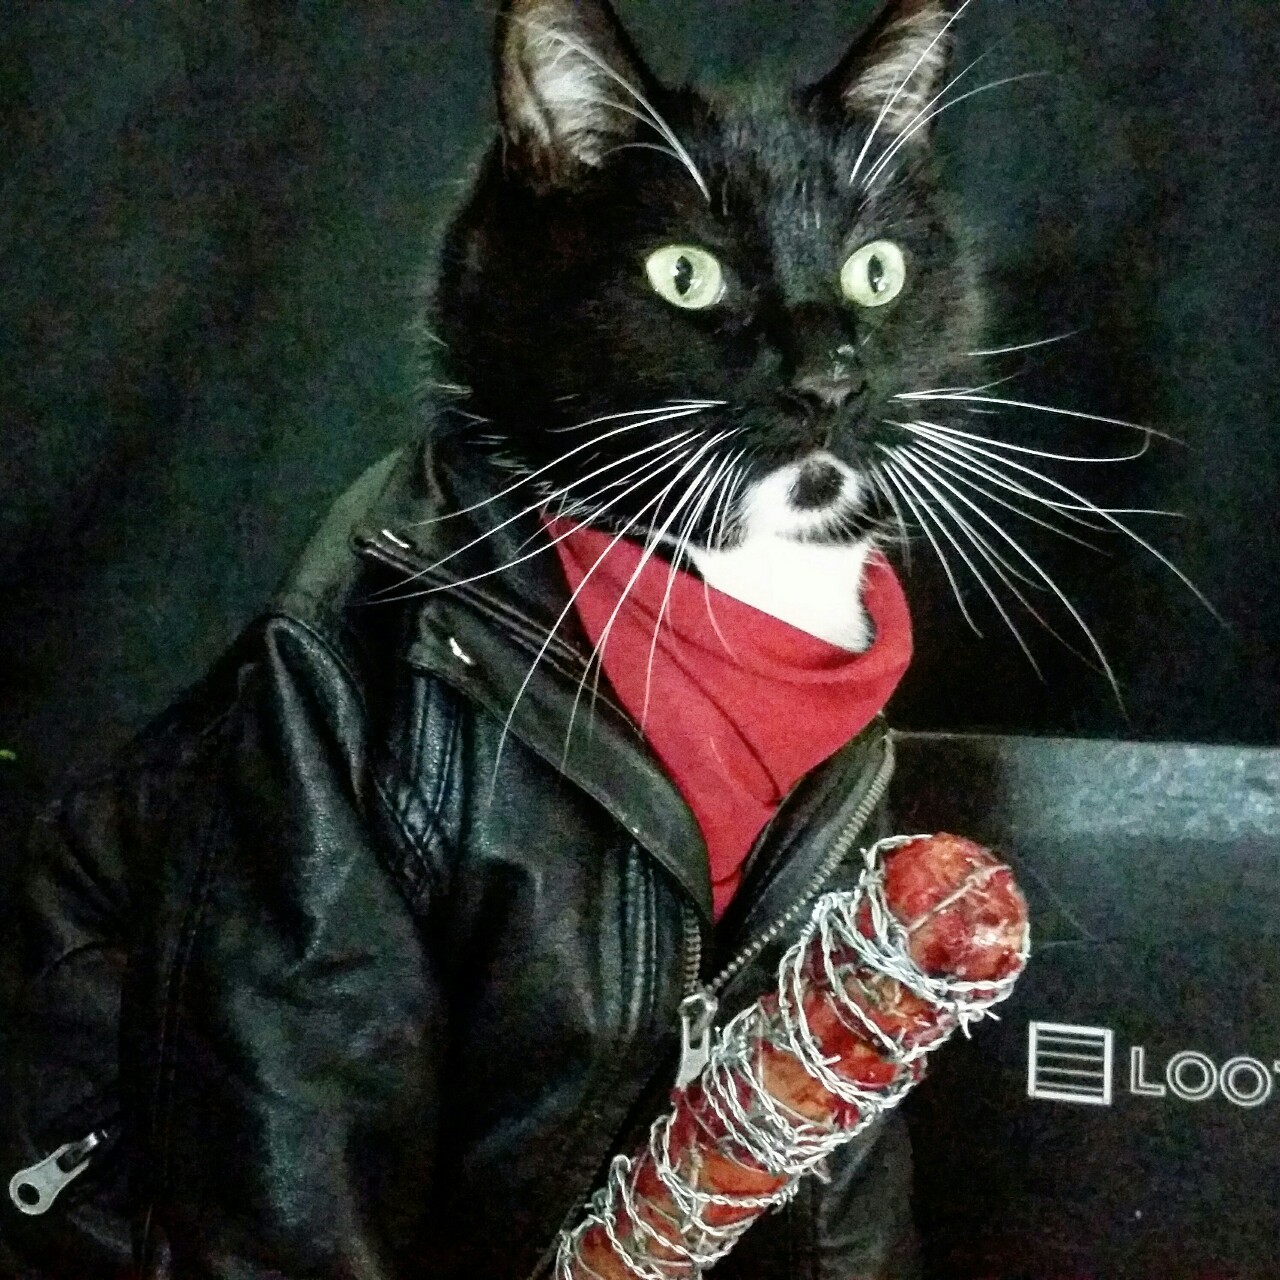 cat-cosplay:   “You can breathe. You can blink. You can cry. Hell, you’re all